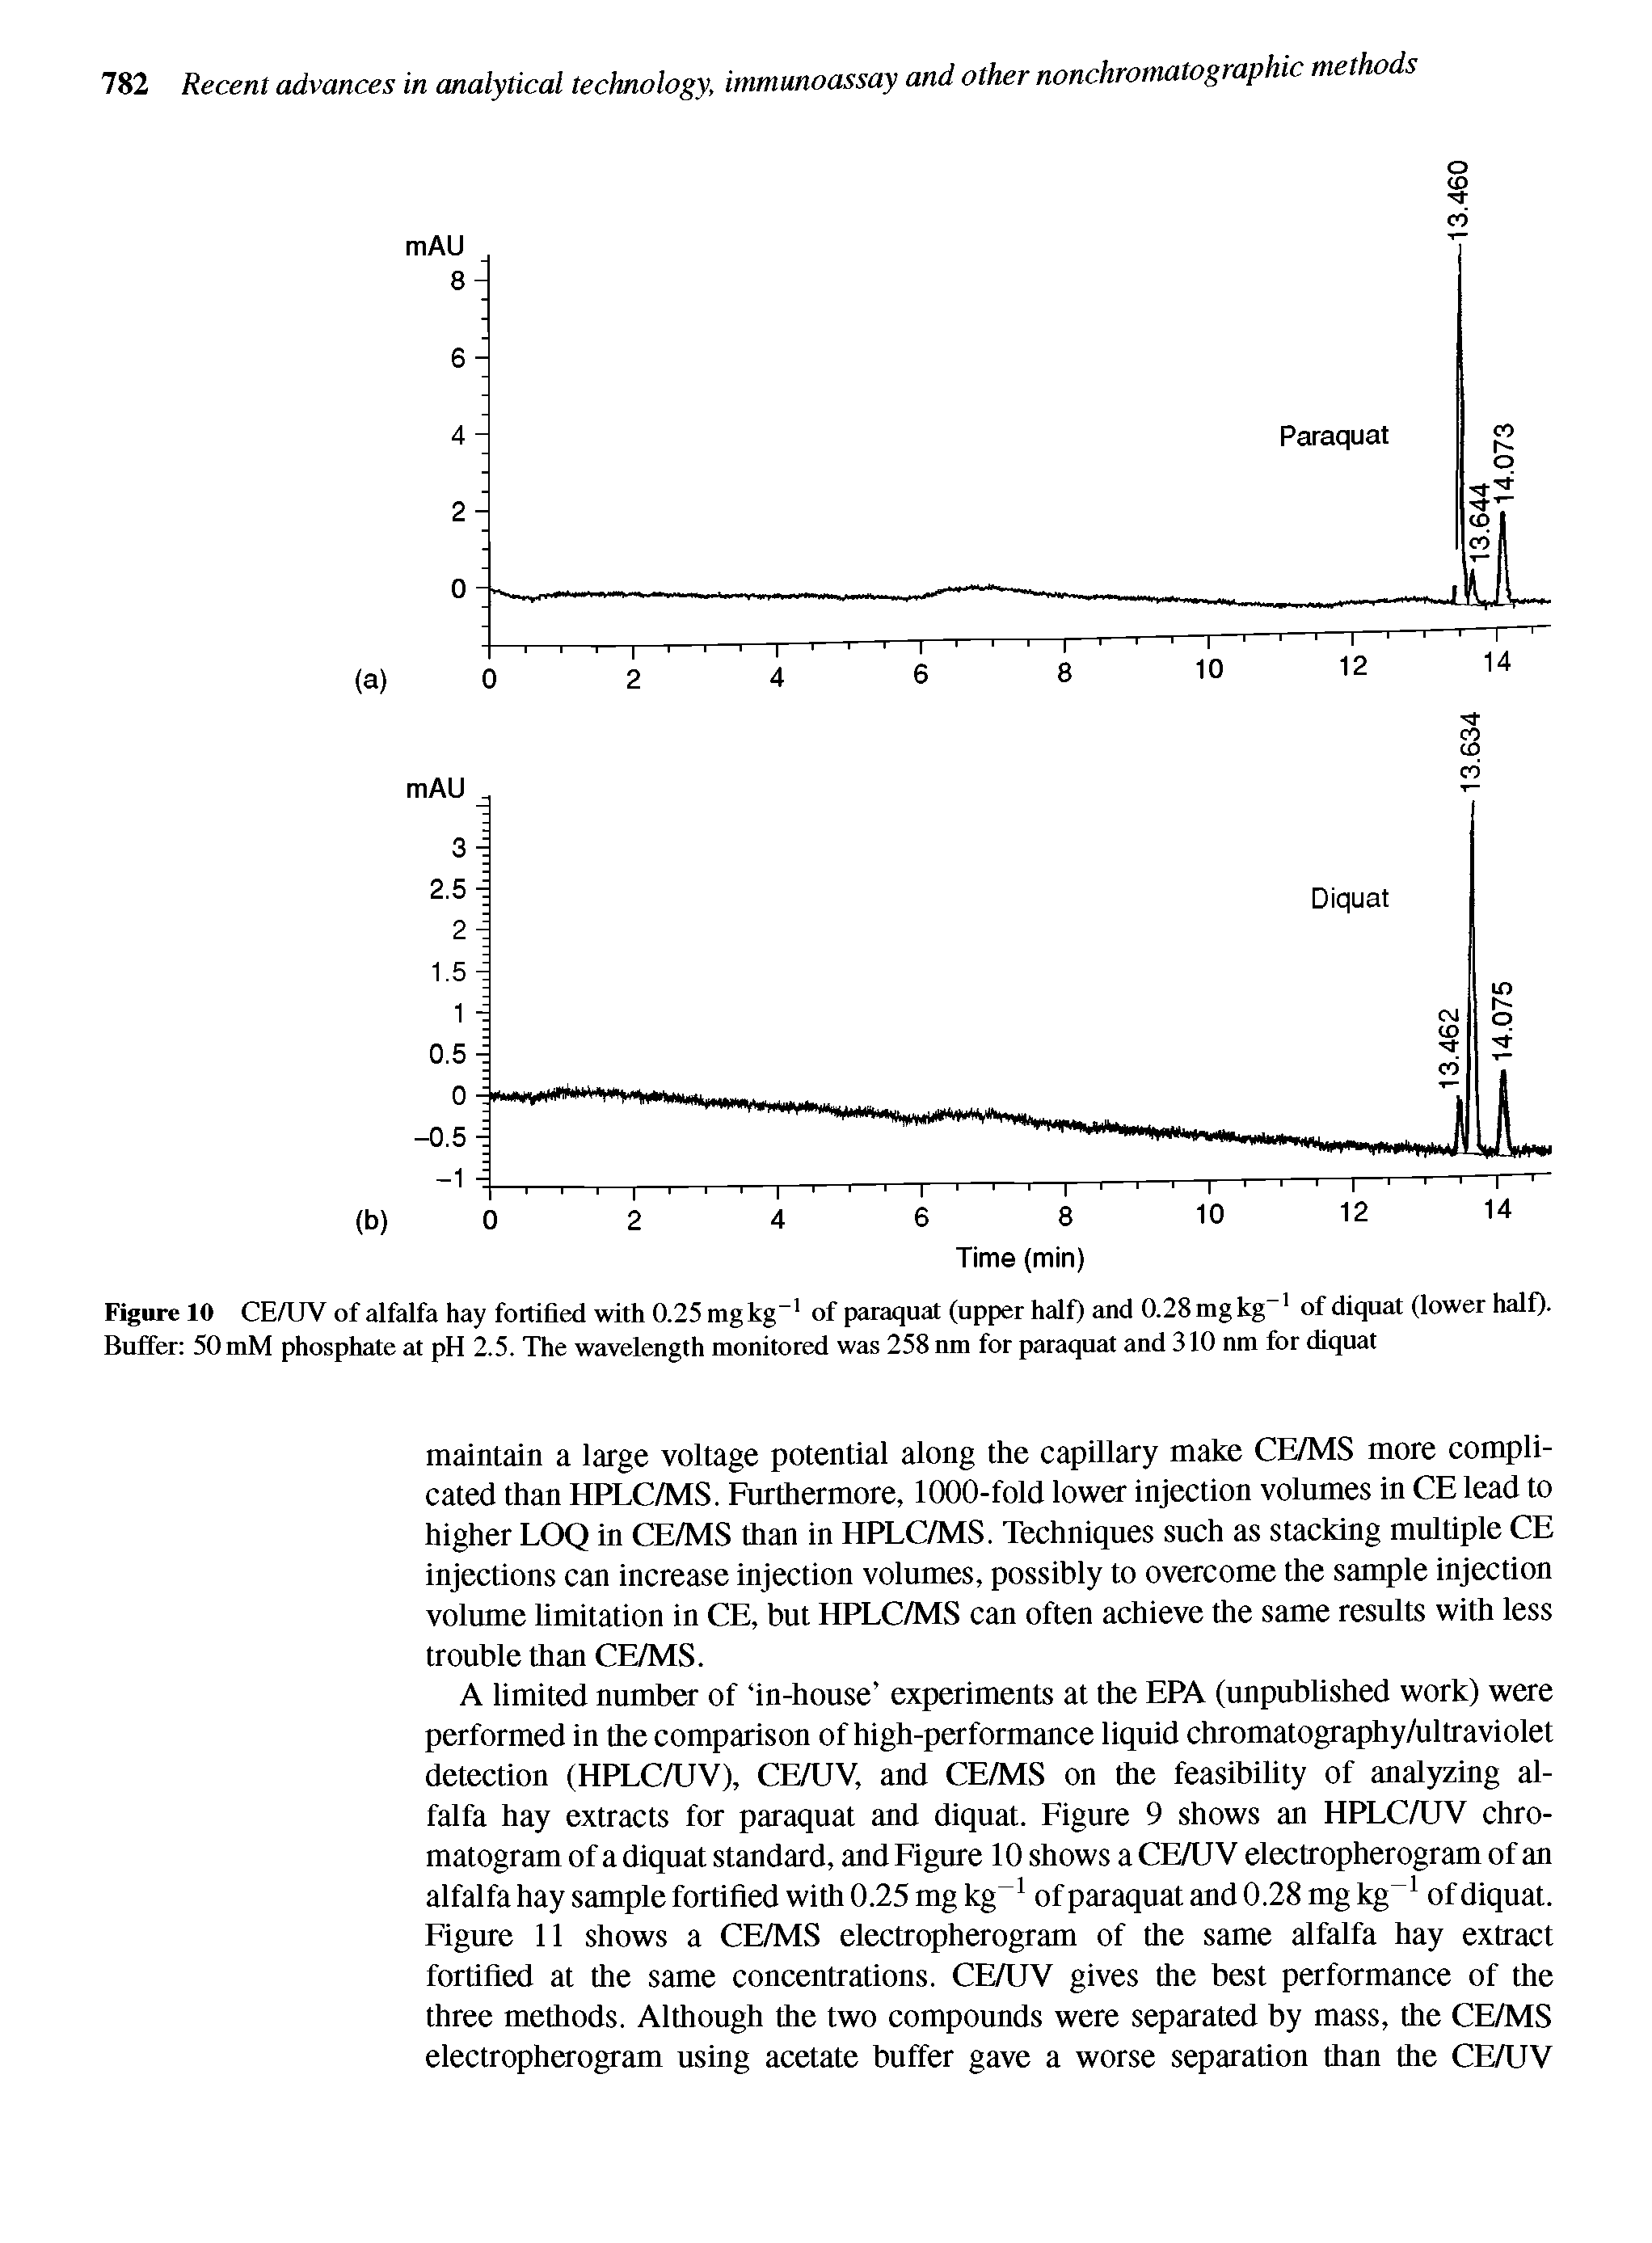 Figure 10 CE/UV of alfalfa hay fortified with 0.25 mg kg of paraquat (upper half) and 0.28 mg kg of diquat (lower half). Buffer 50 mM phosphate at pH 2.5. The wavelength monitored was 258 nm for paraquat and 310 nm for diquat...